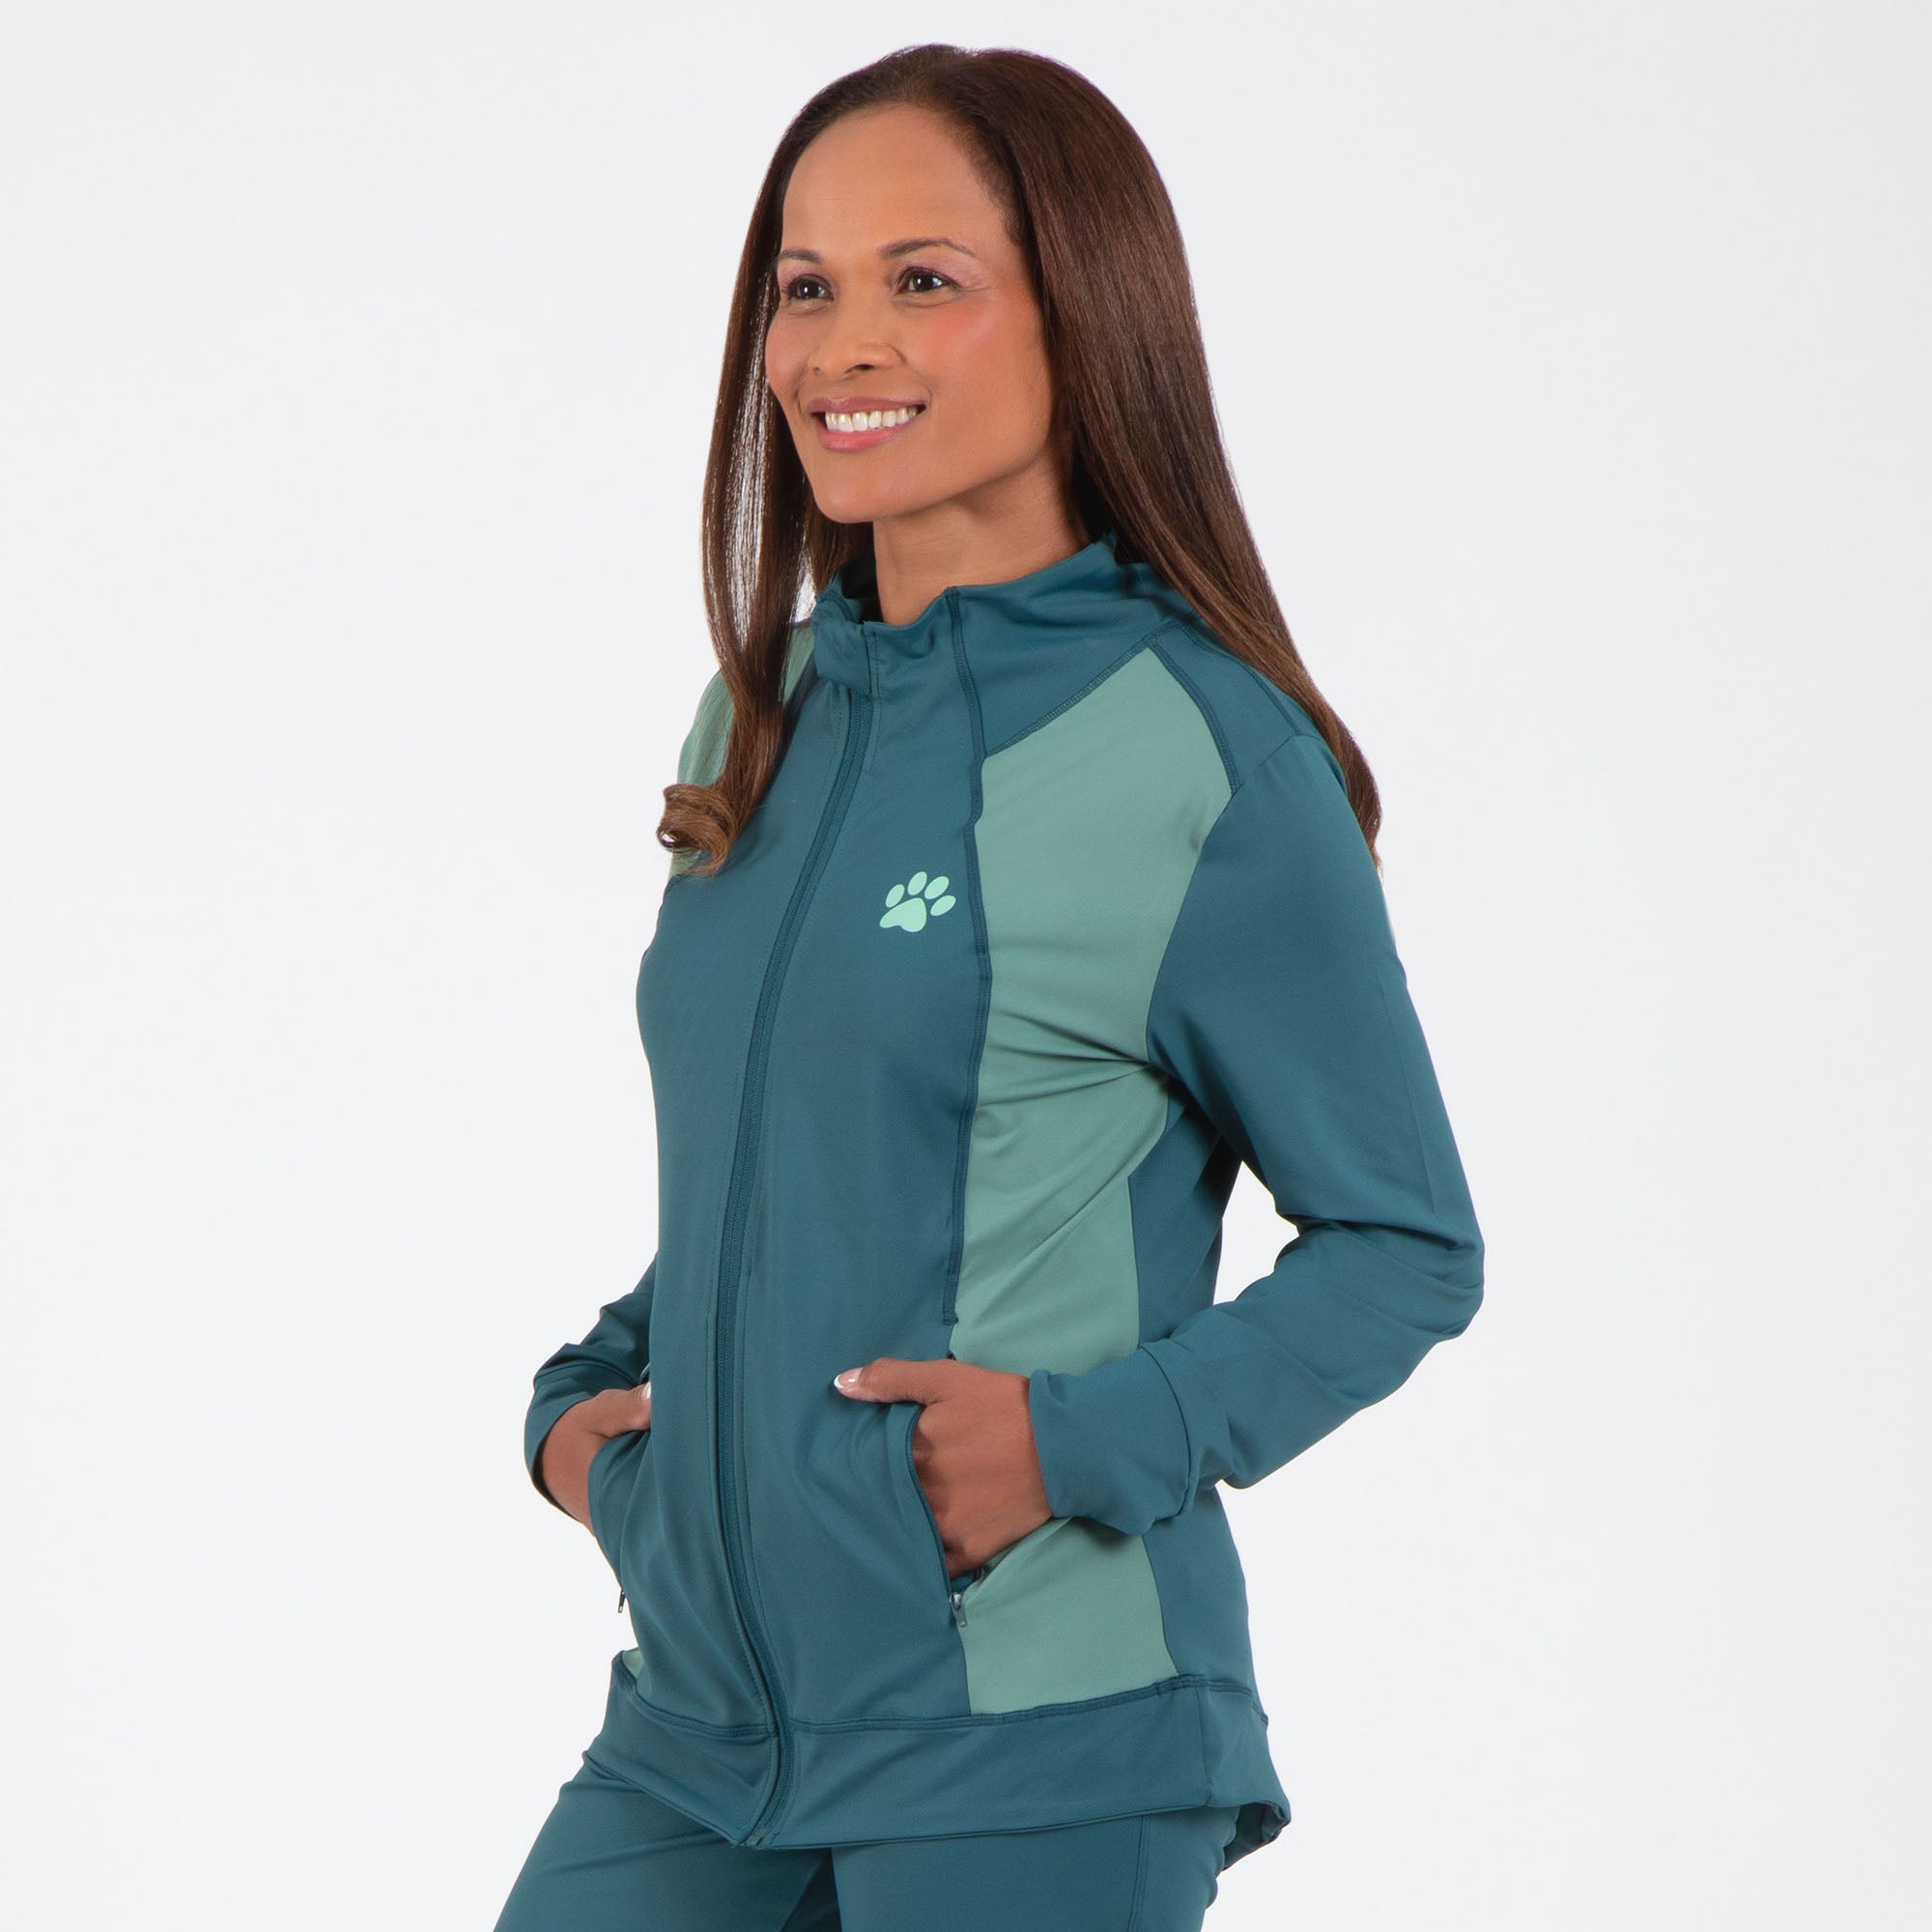 Yoga Paw Print Cross Over Separates - Teal - Jacket - 2X